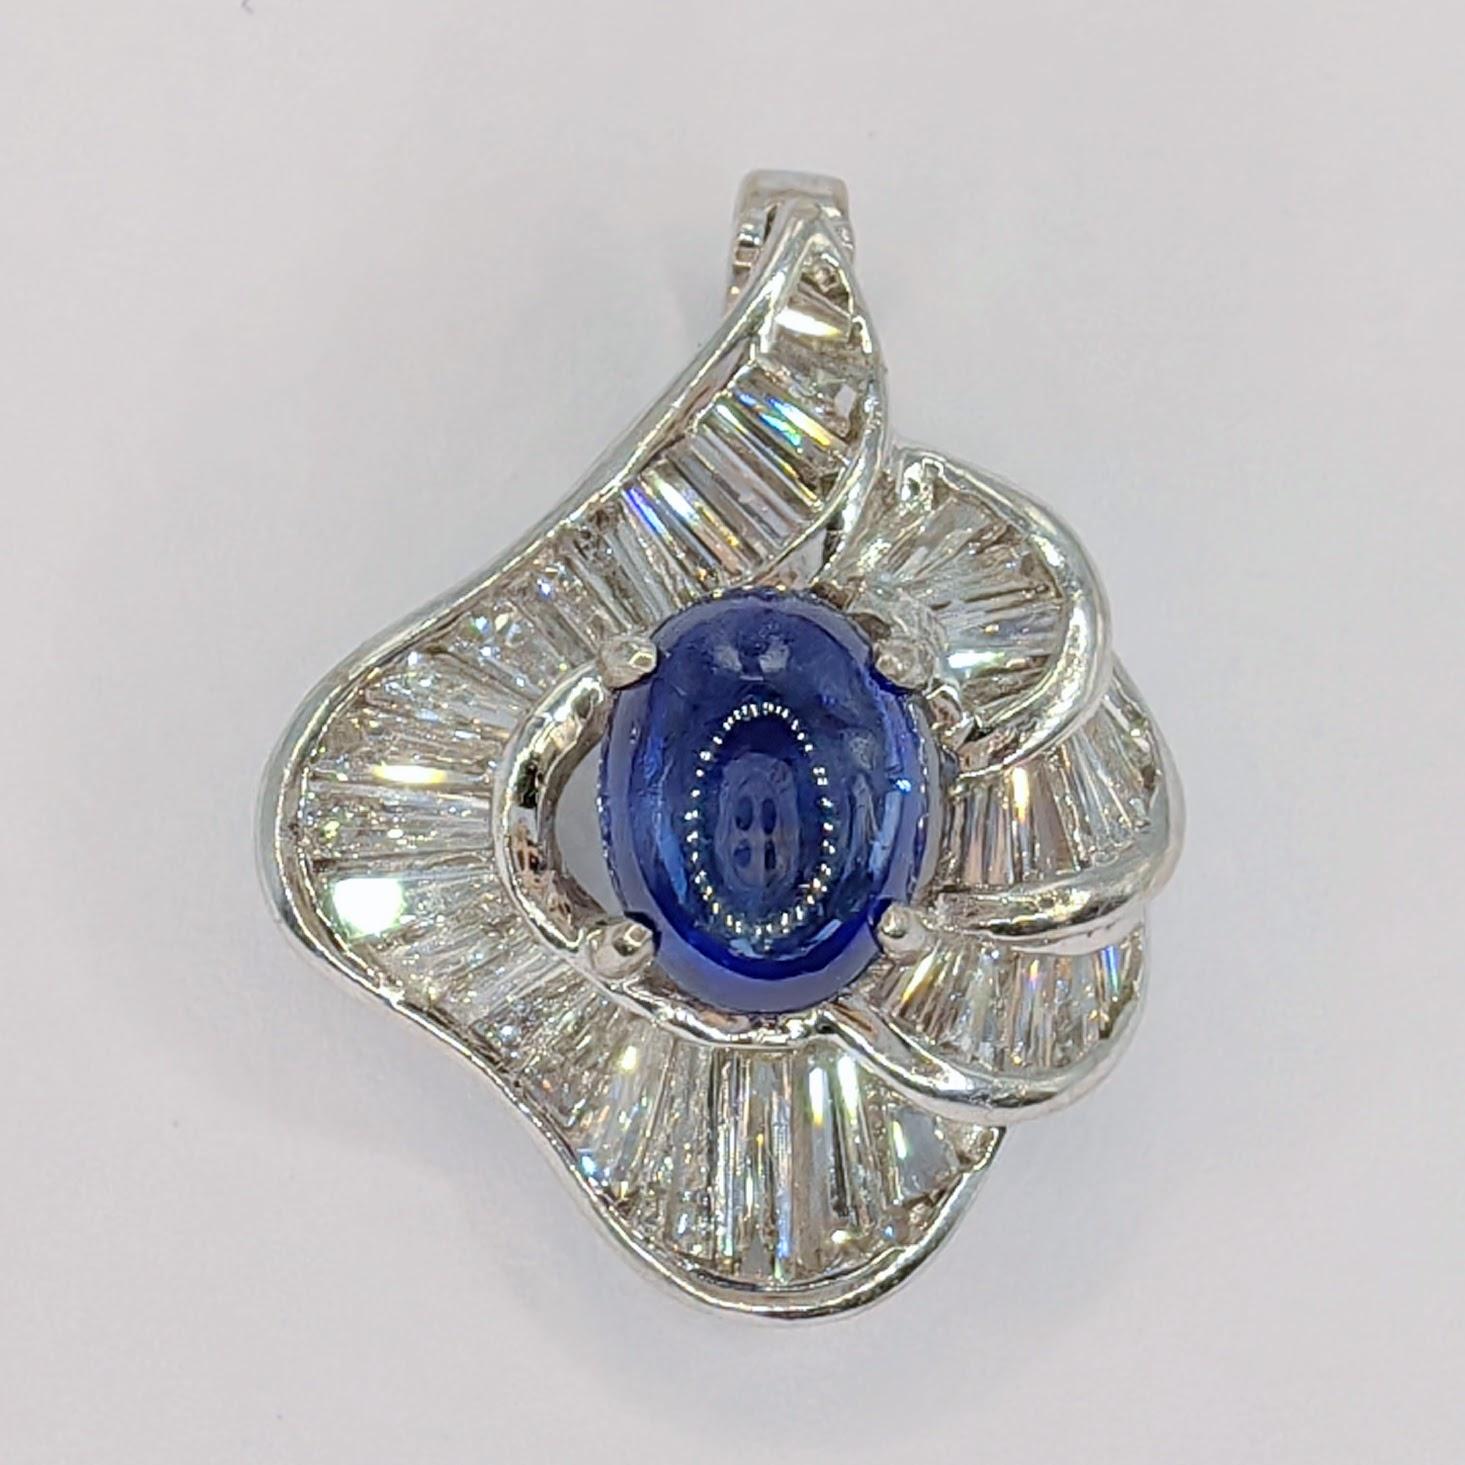 Introducing the Vintage 1.86ct Cabochon Royal Blue Sapphire & Diamond Ballerina Necklace Pendant, a truly mesmerizing piece that exudes elegance and sophistication.

At the heart of this pendant is a stunning cabochon cut Royal Blue Sapphire,